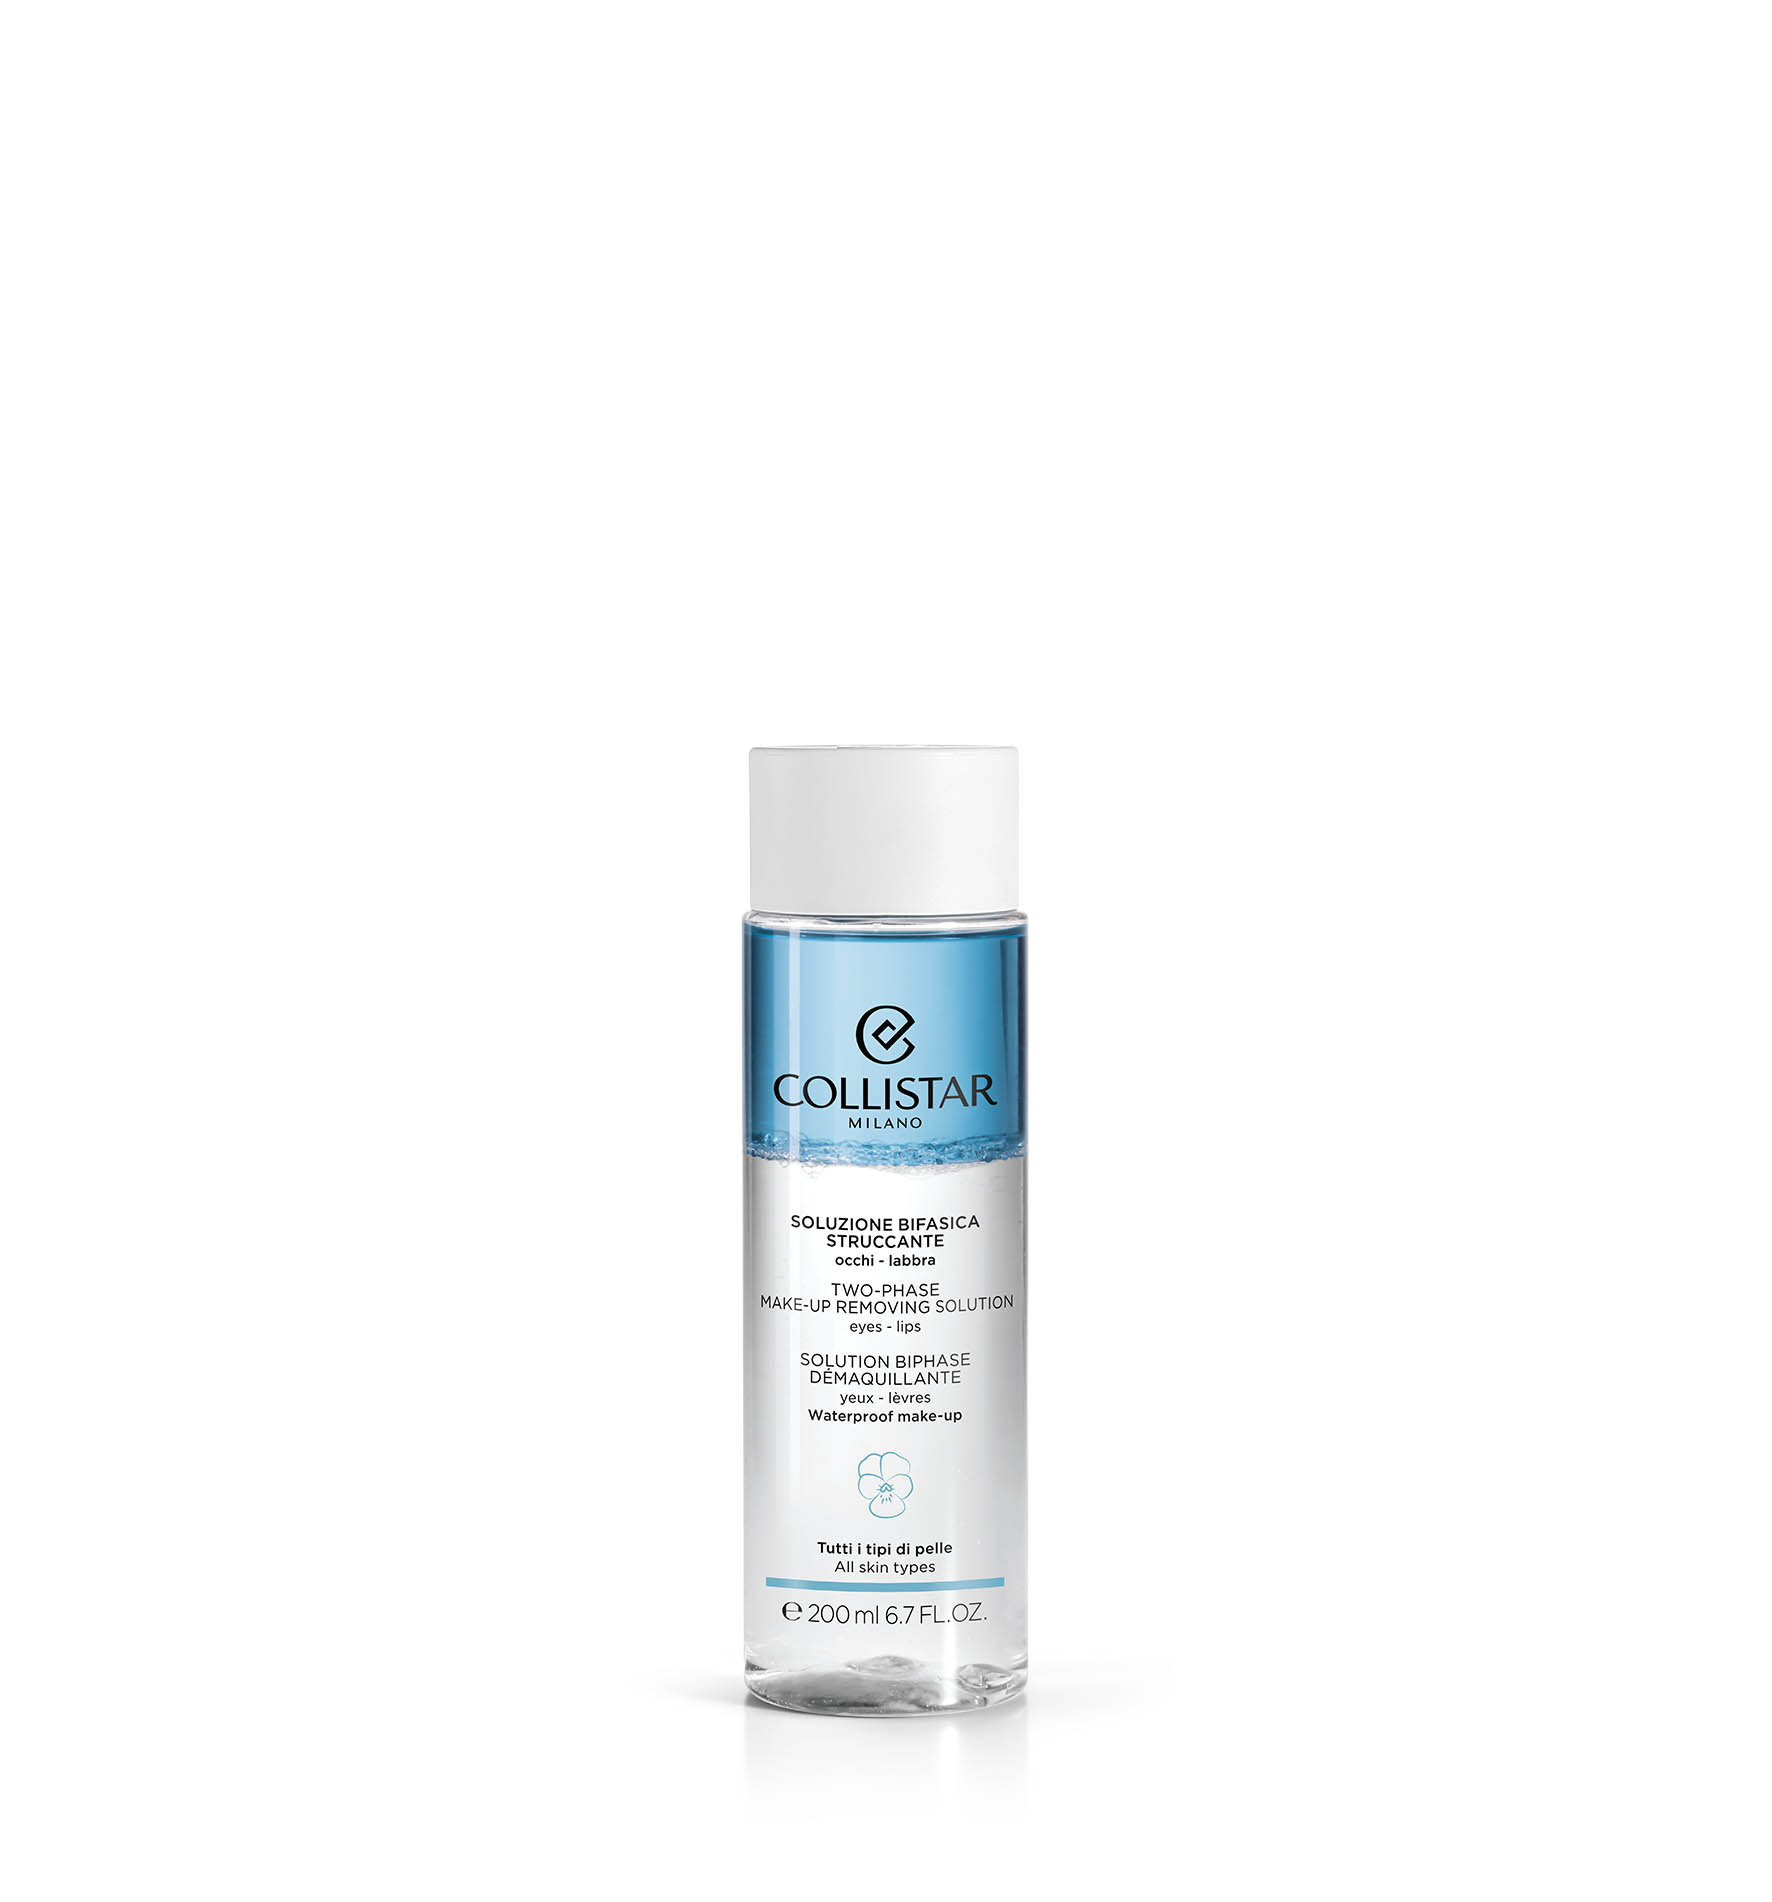 TWO-PHASE MAKE-UP REMOVING SOLUTION
OGEN - LIPPEN - NIEUW | Collistar - Shop Online Ufficiale